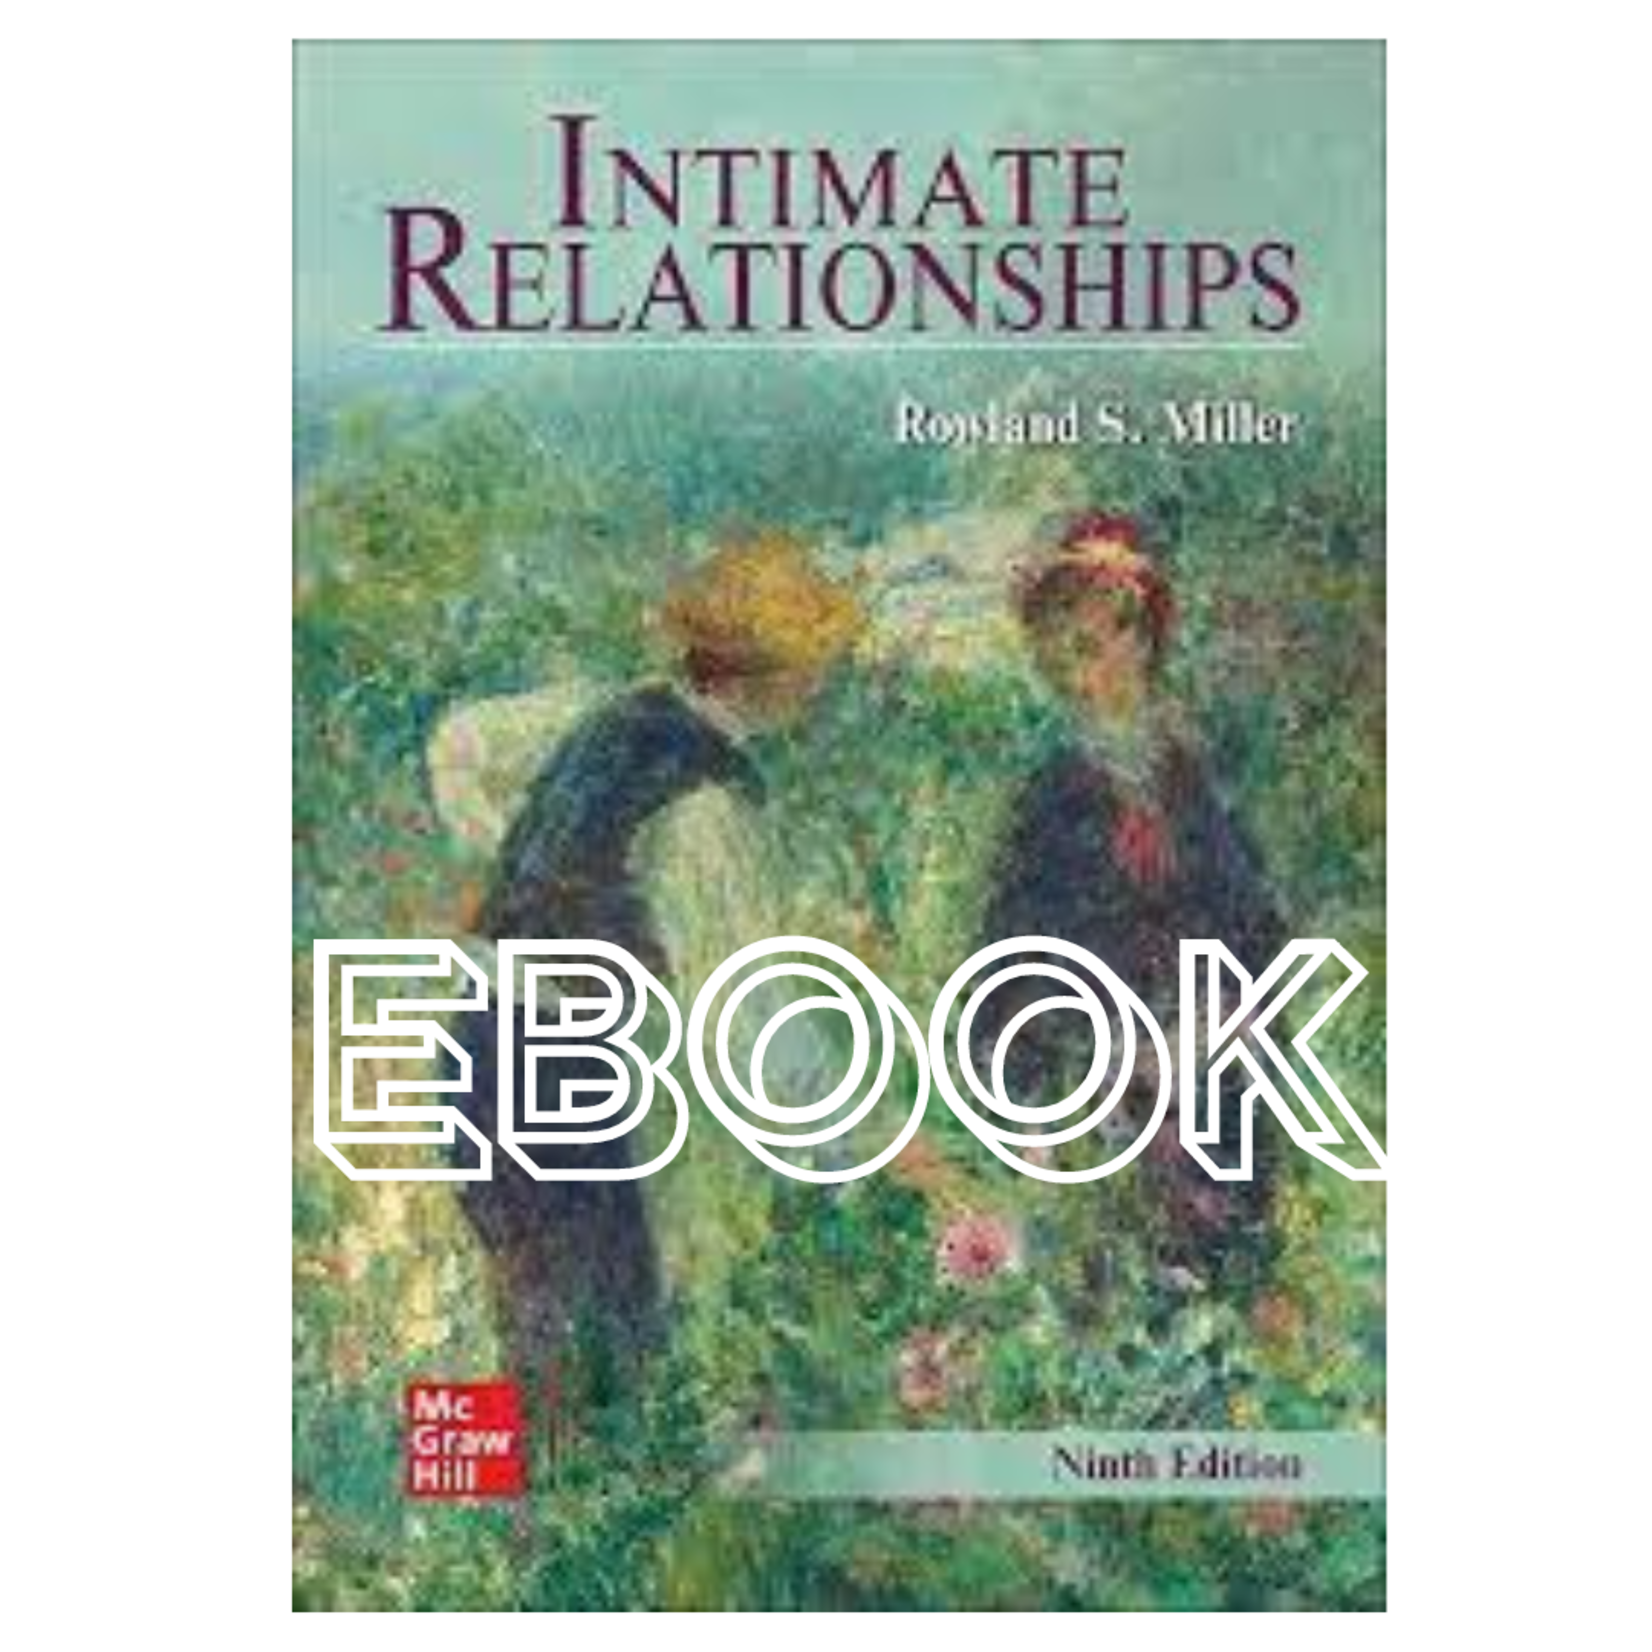 McGraw-Hill Intimate Relationships EBOOK